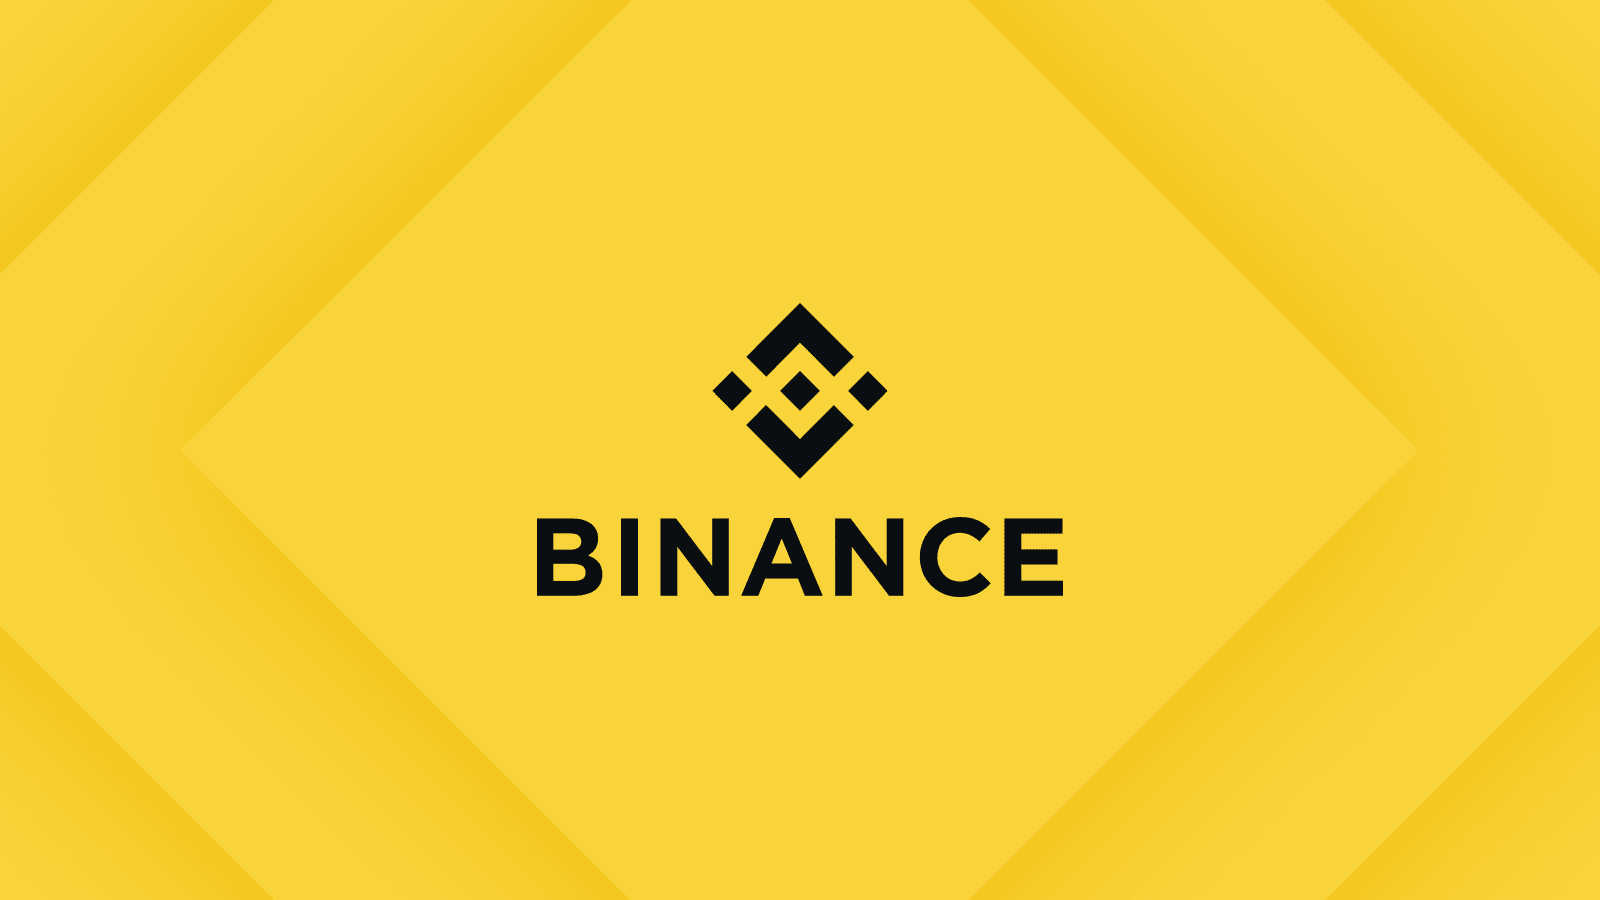 Binance enforces stricter measures against account misuse